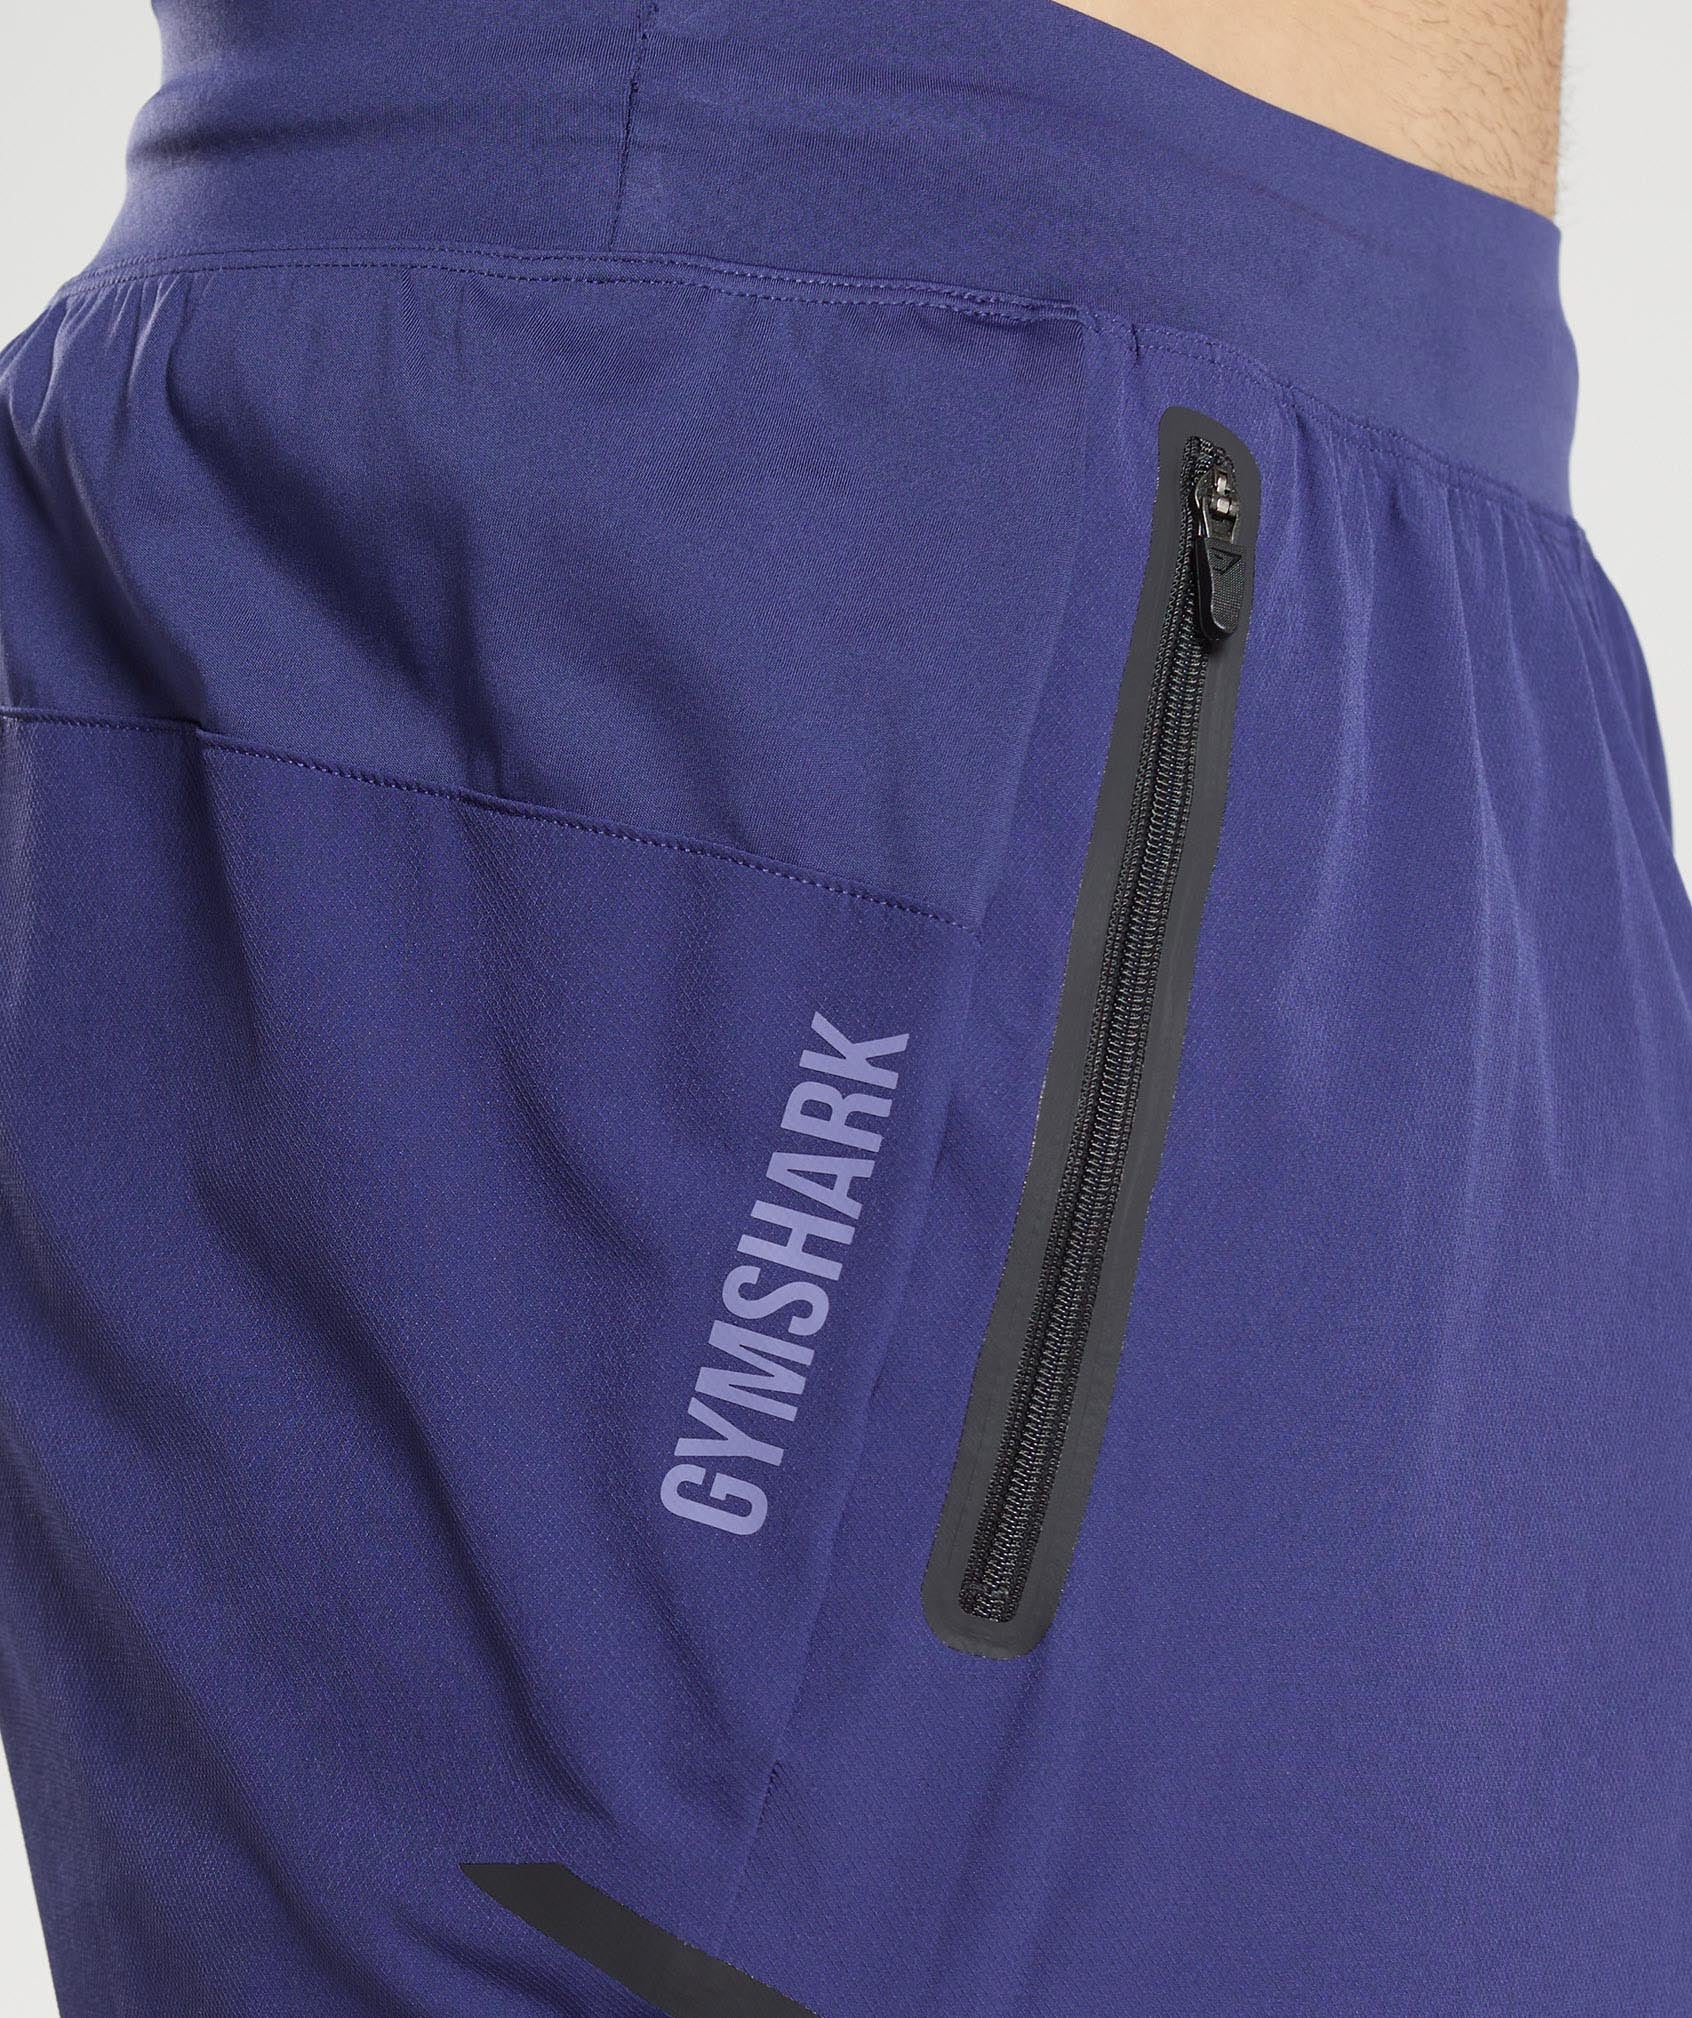 Apex 5" Perform Shorts in Neptune Purple - view 5